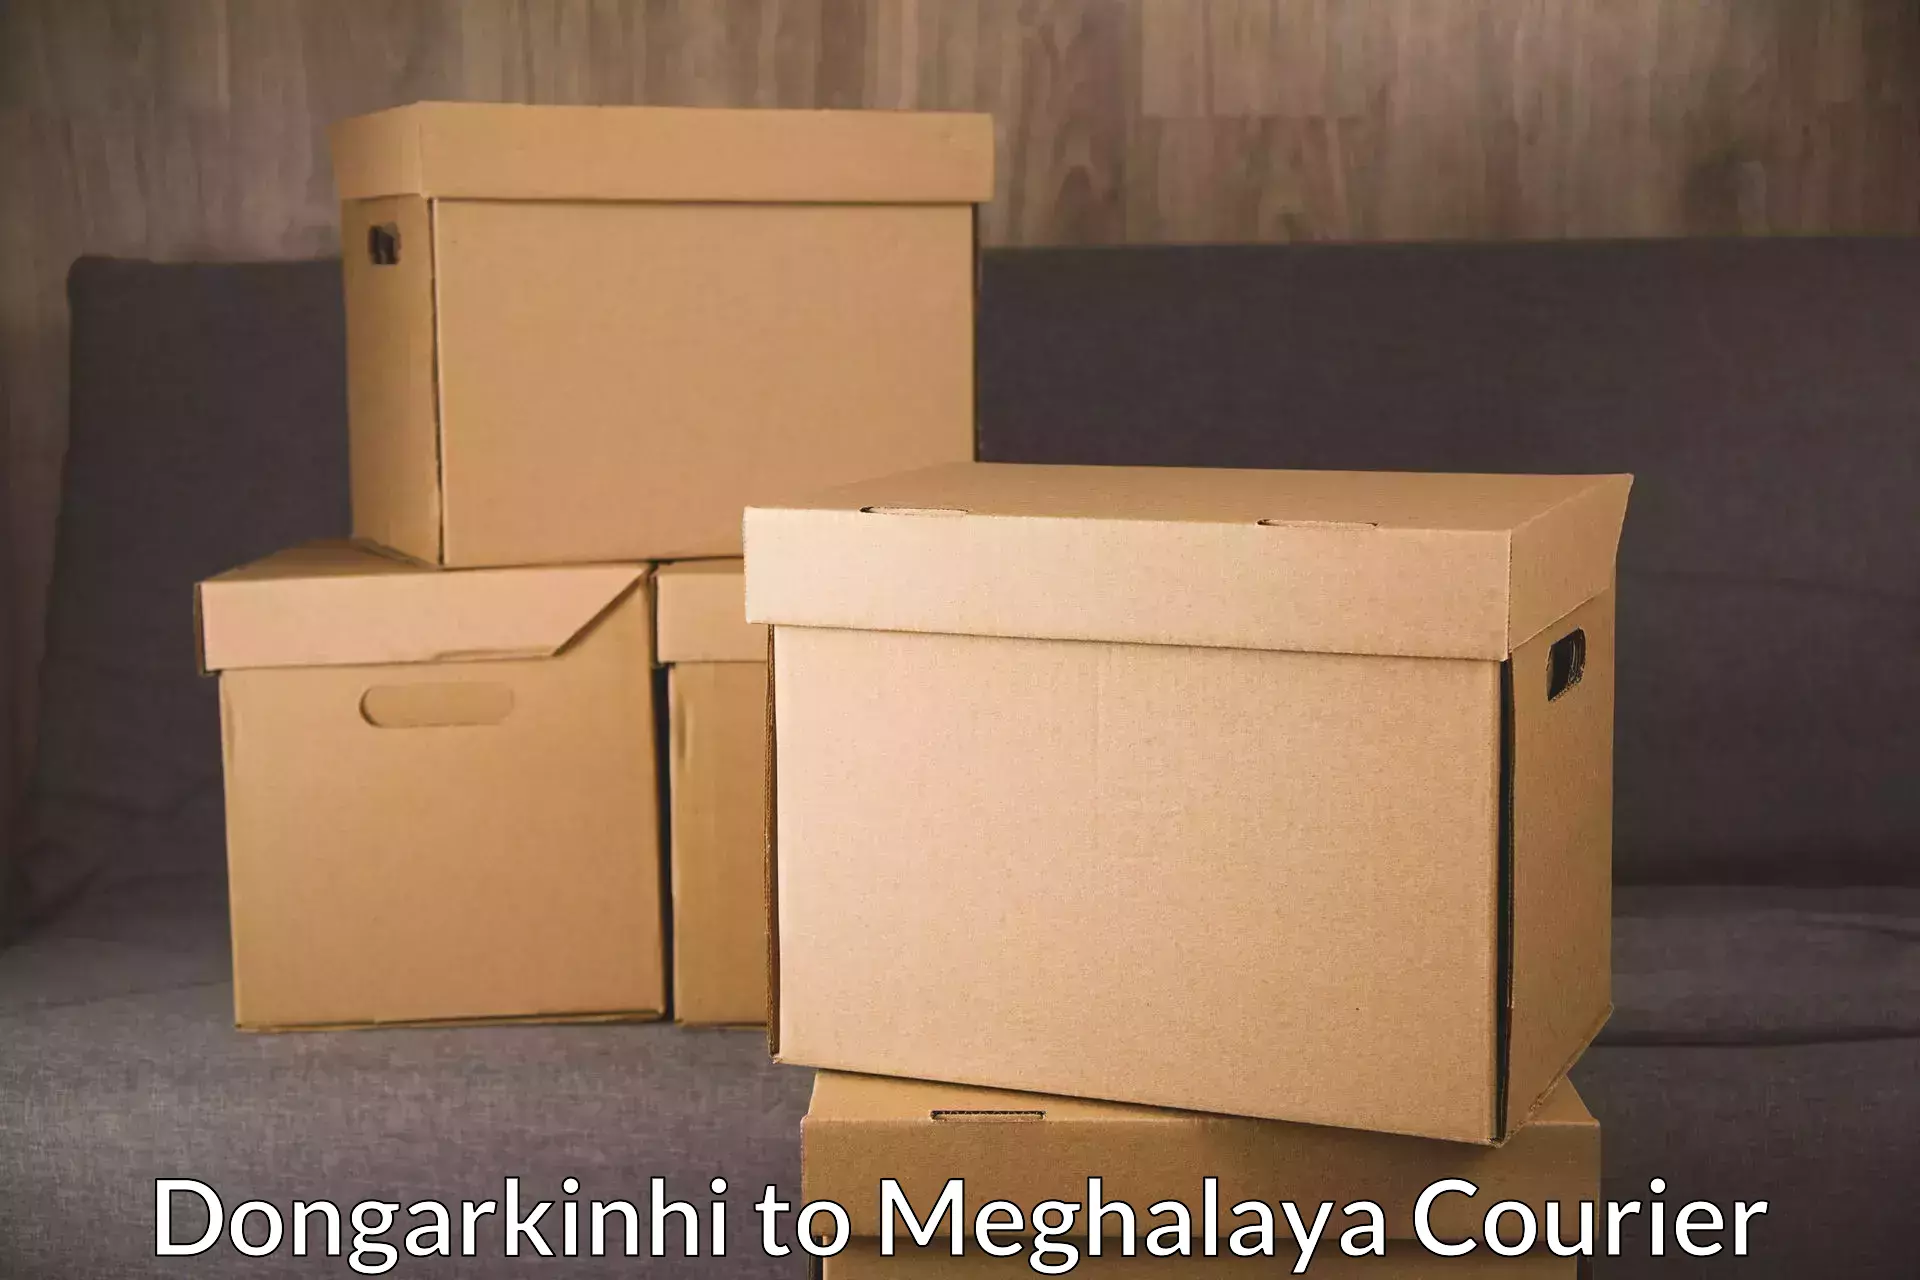 Reliable courier service in Dongarkinhi to West Khasi Hills